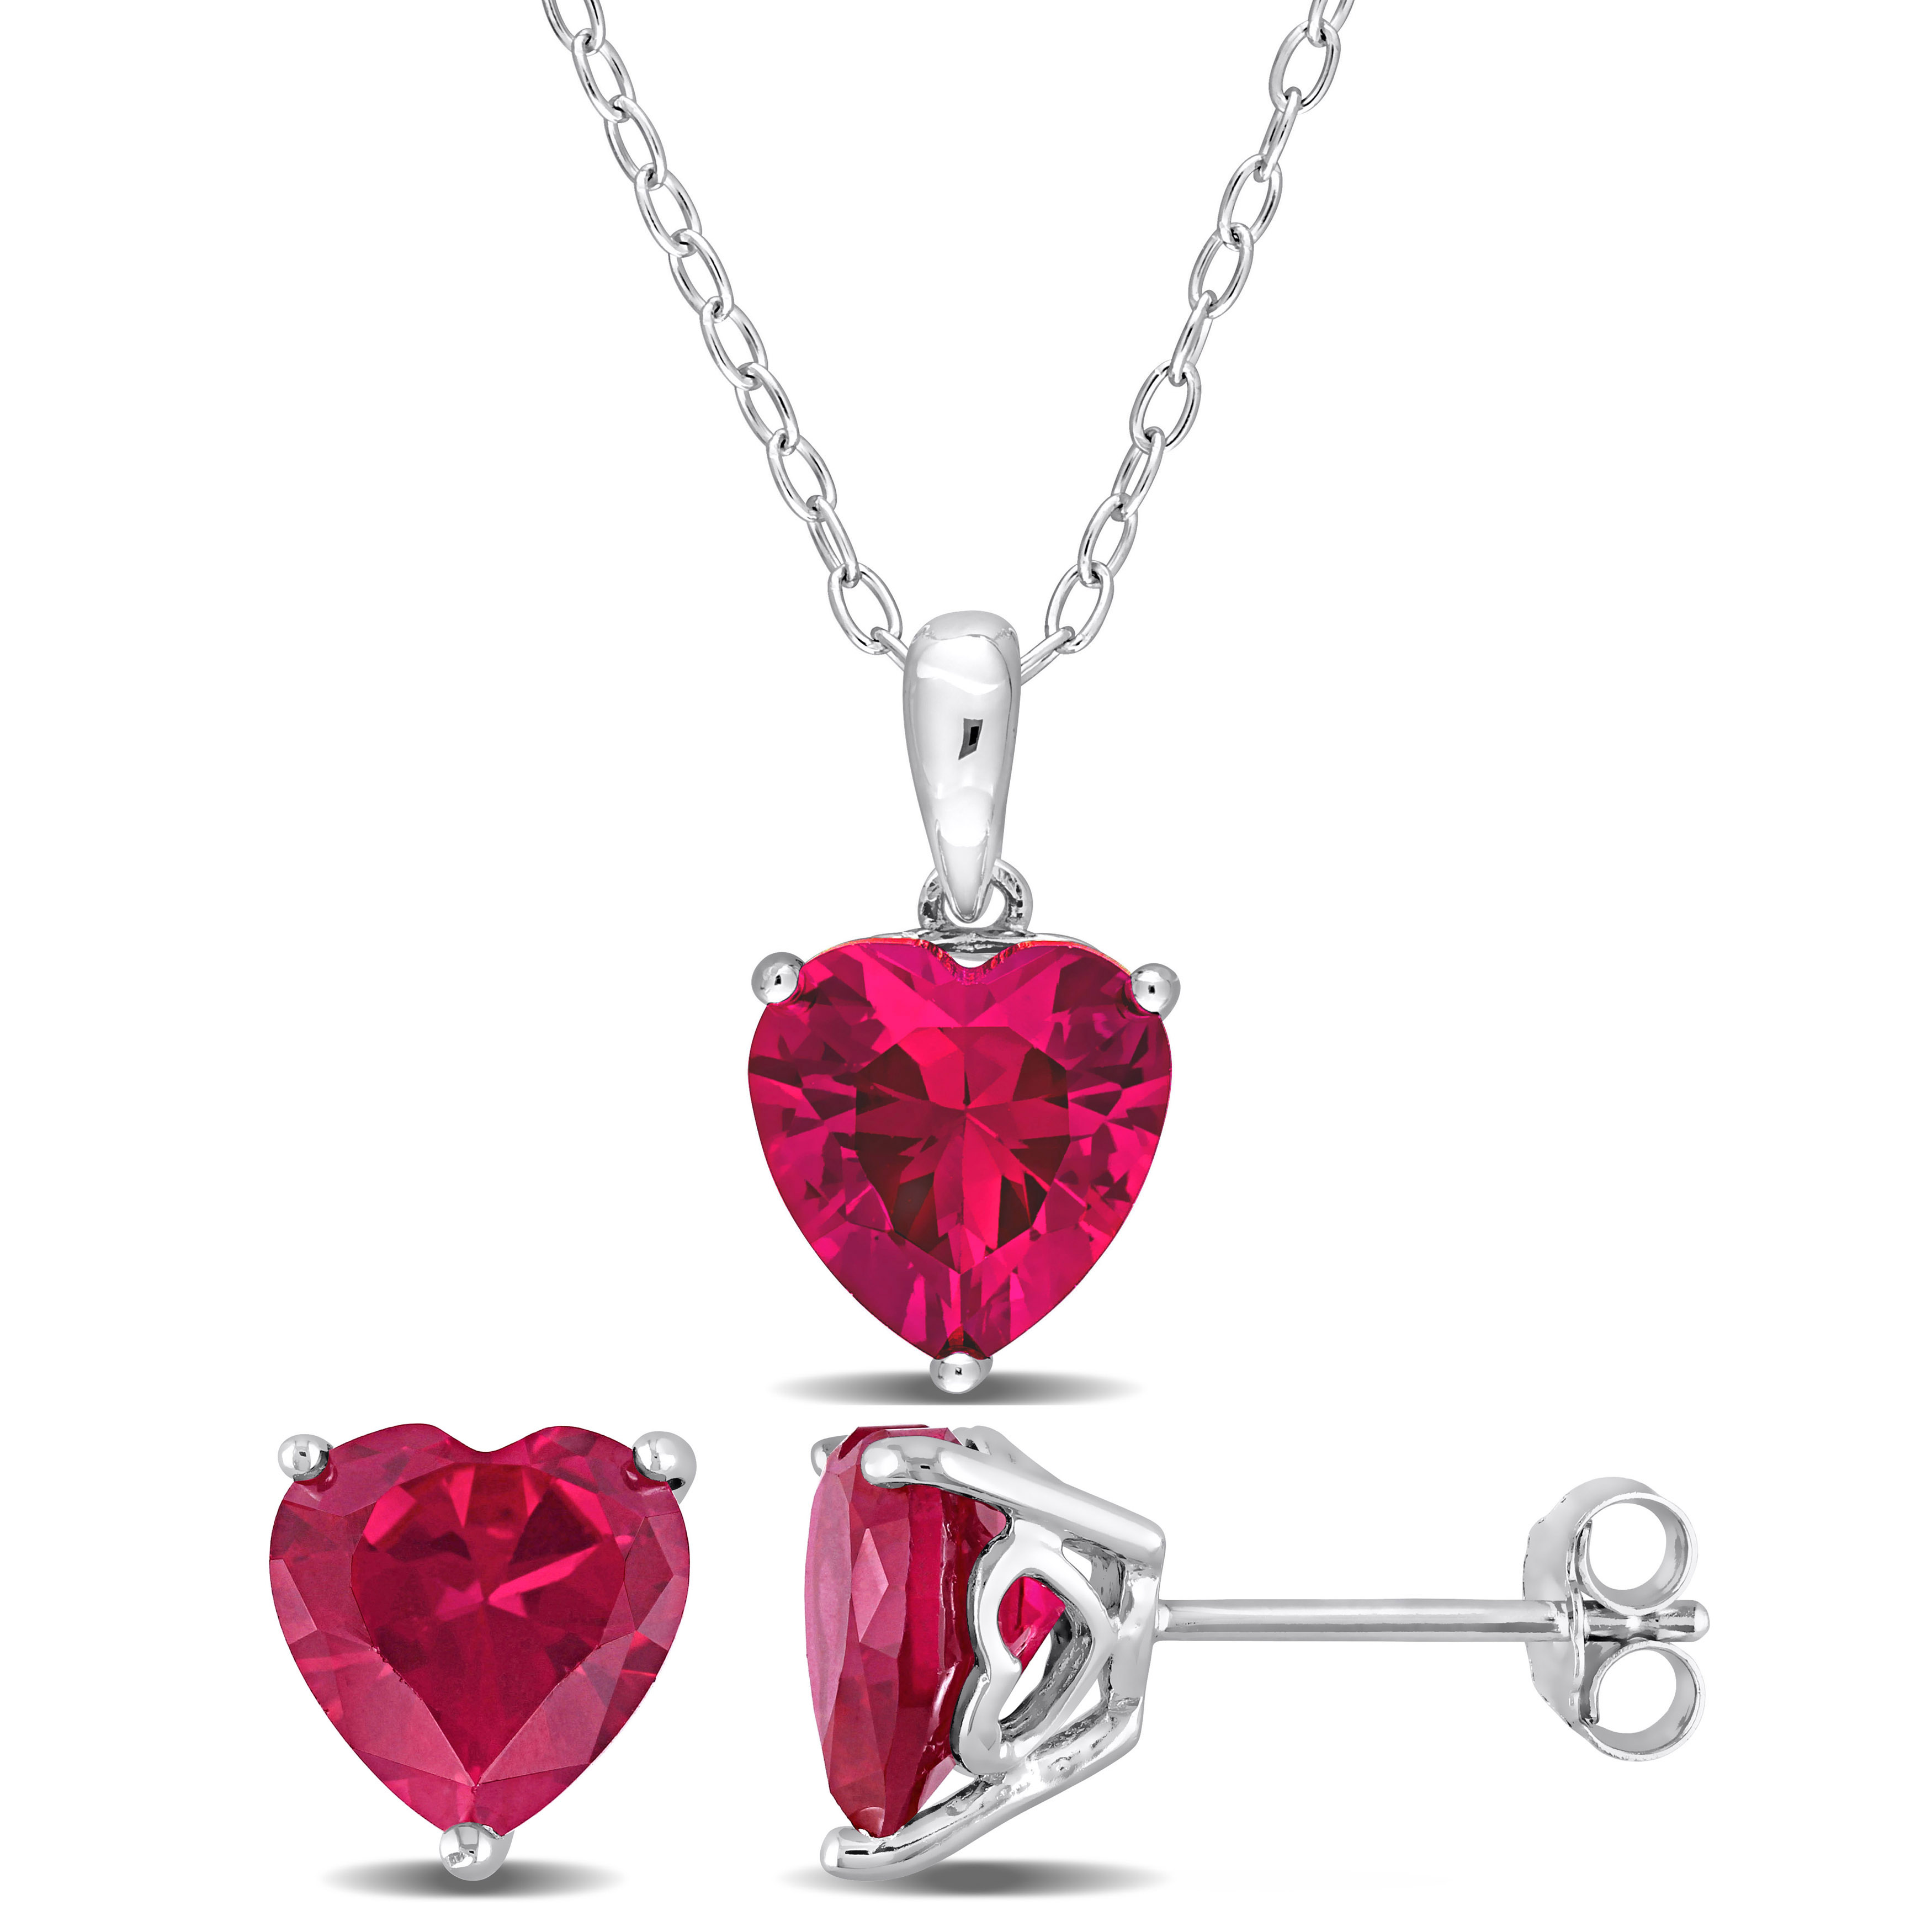 8 1/2 CT TGW Heart-Shape Created Ruby 2-Piece Set of Pendant with Chain and Earrings in Sterling Silver